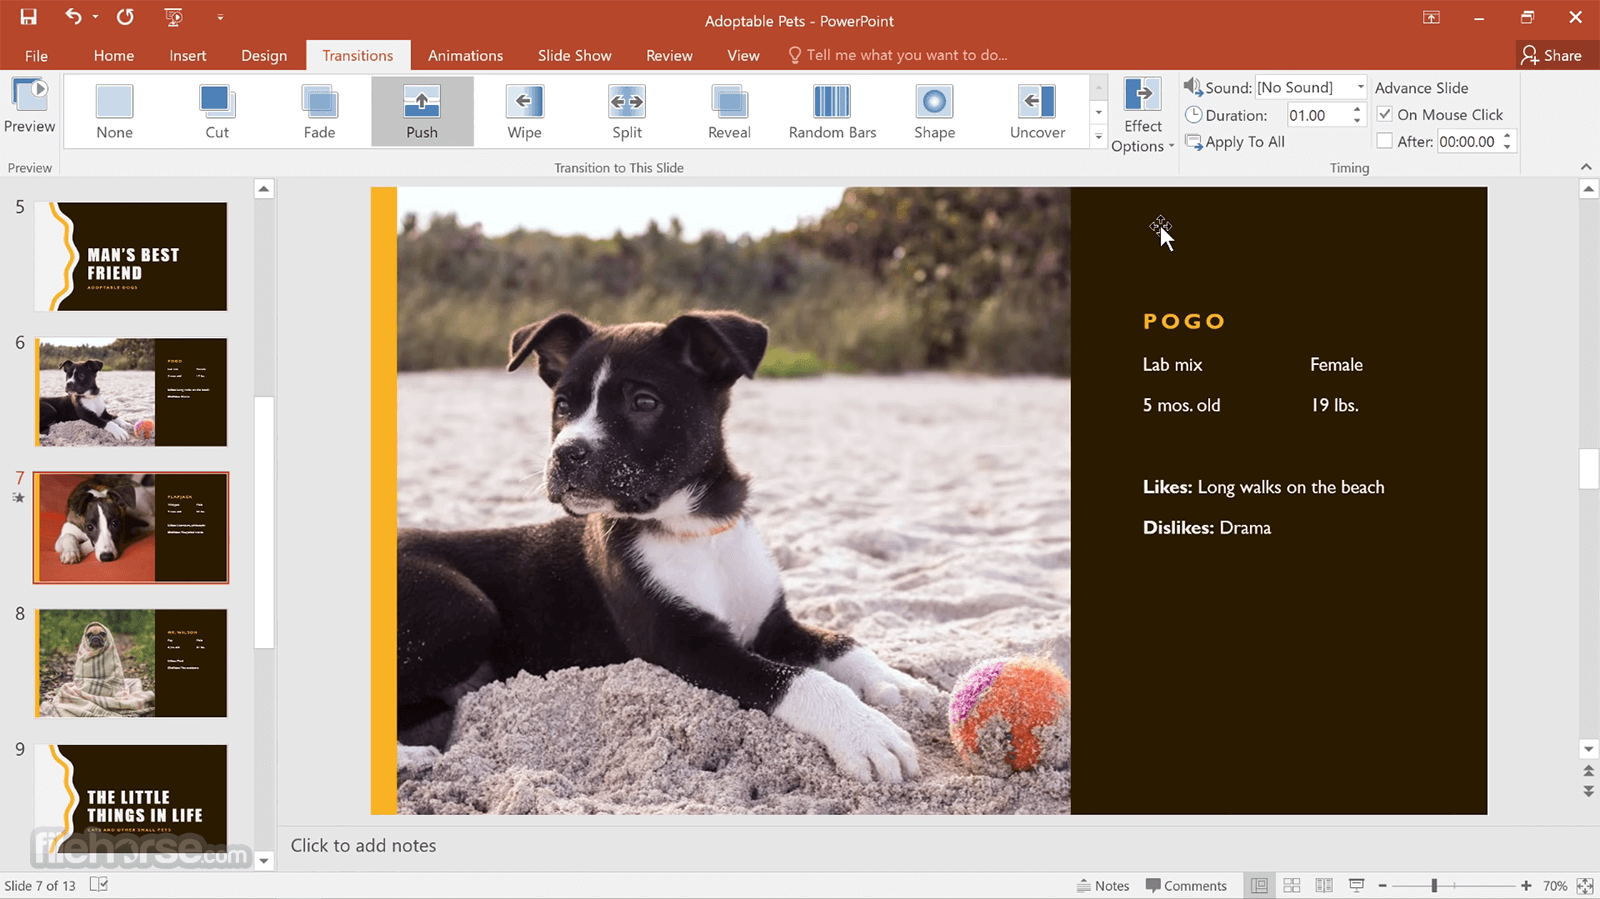 microsoft office for mac free download 2013